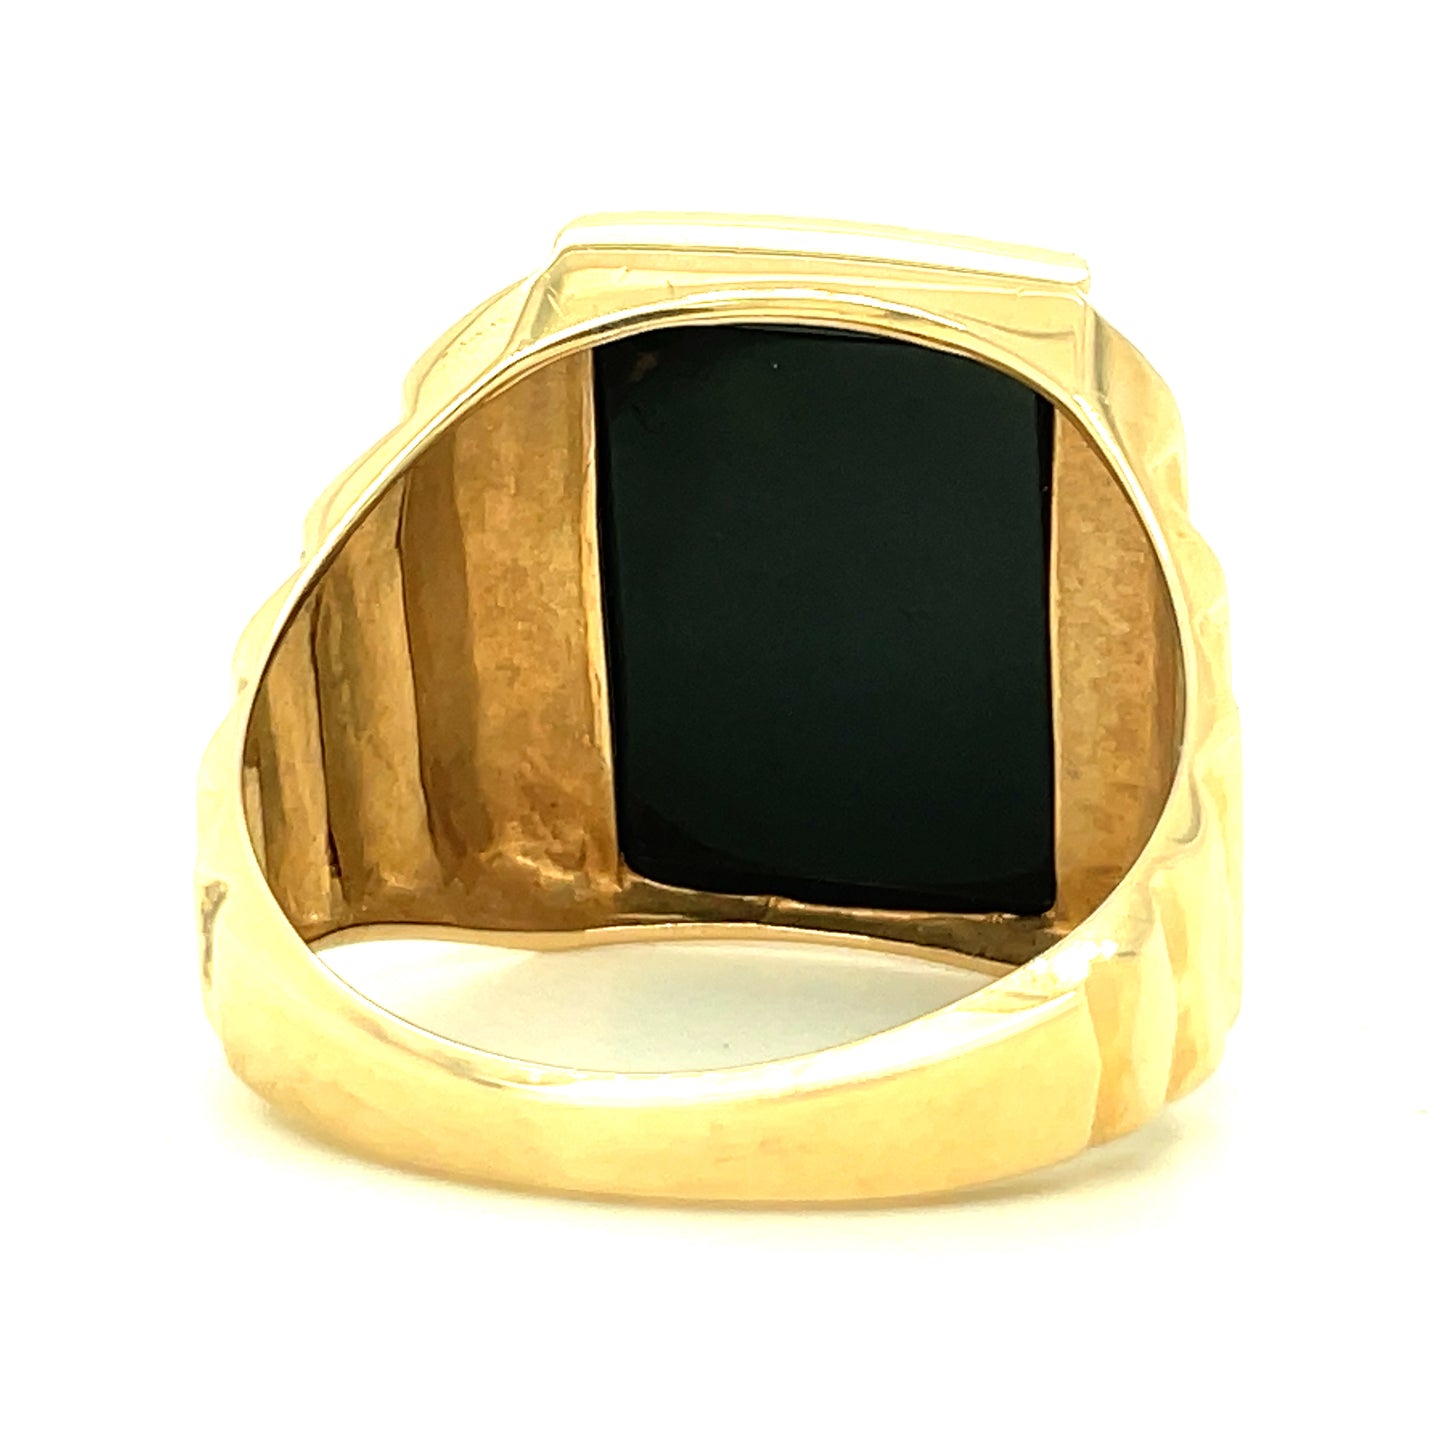 Vintage 14k Yellow Gold and Black Onyx Ring Size 9 1/4